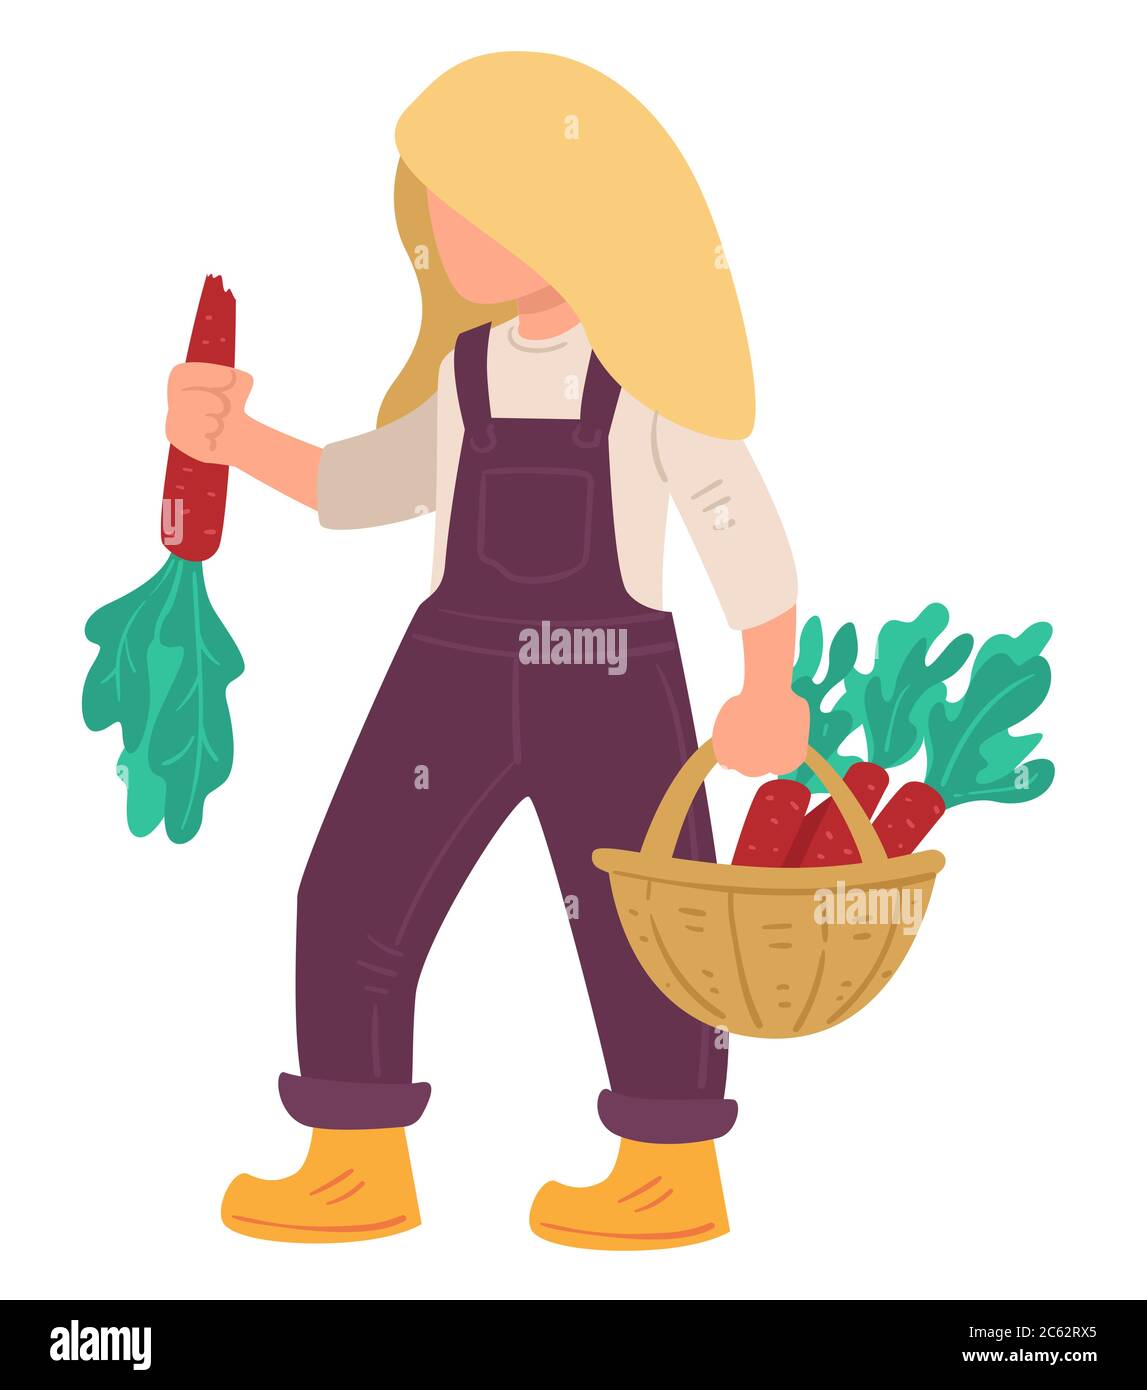 Farming character with ripe carrots in woven basket Stock Vector